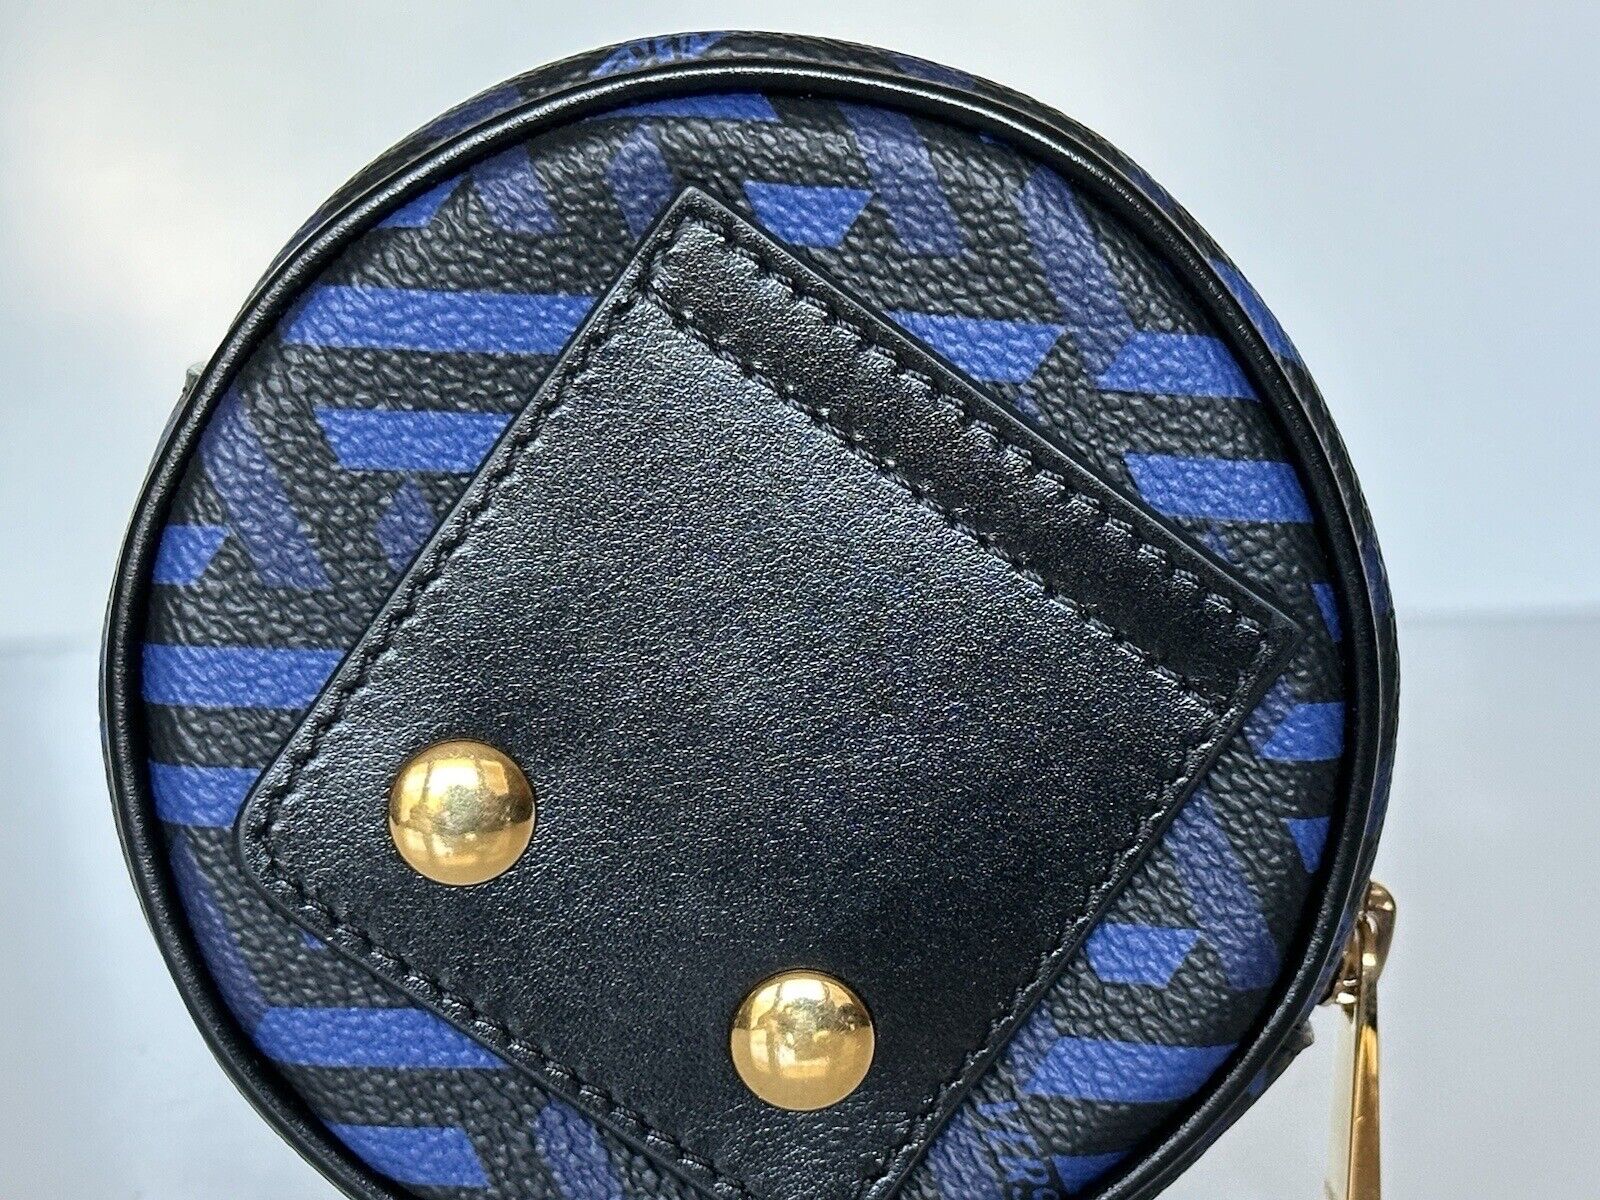 NWT $325 Versace Black/Blue Logo Monogram Leather/Canvas Coin Pouch IT 1001876